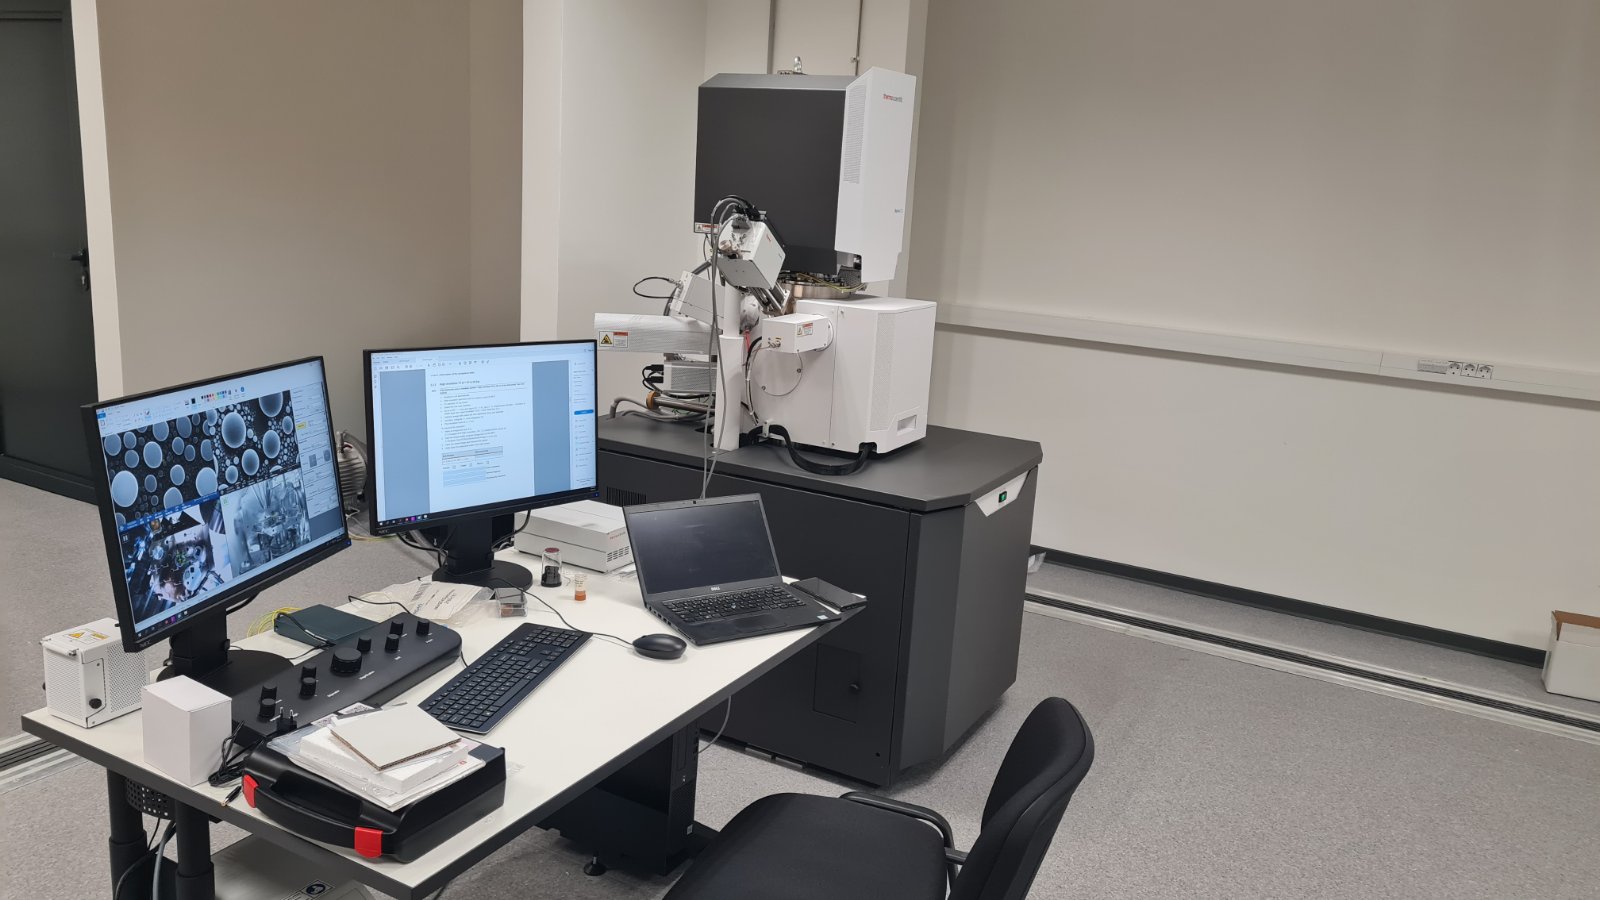 An exceptional performance microscope installed at BioSense